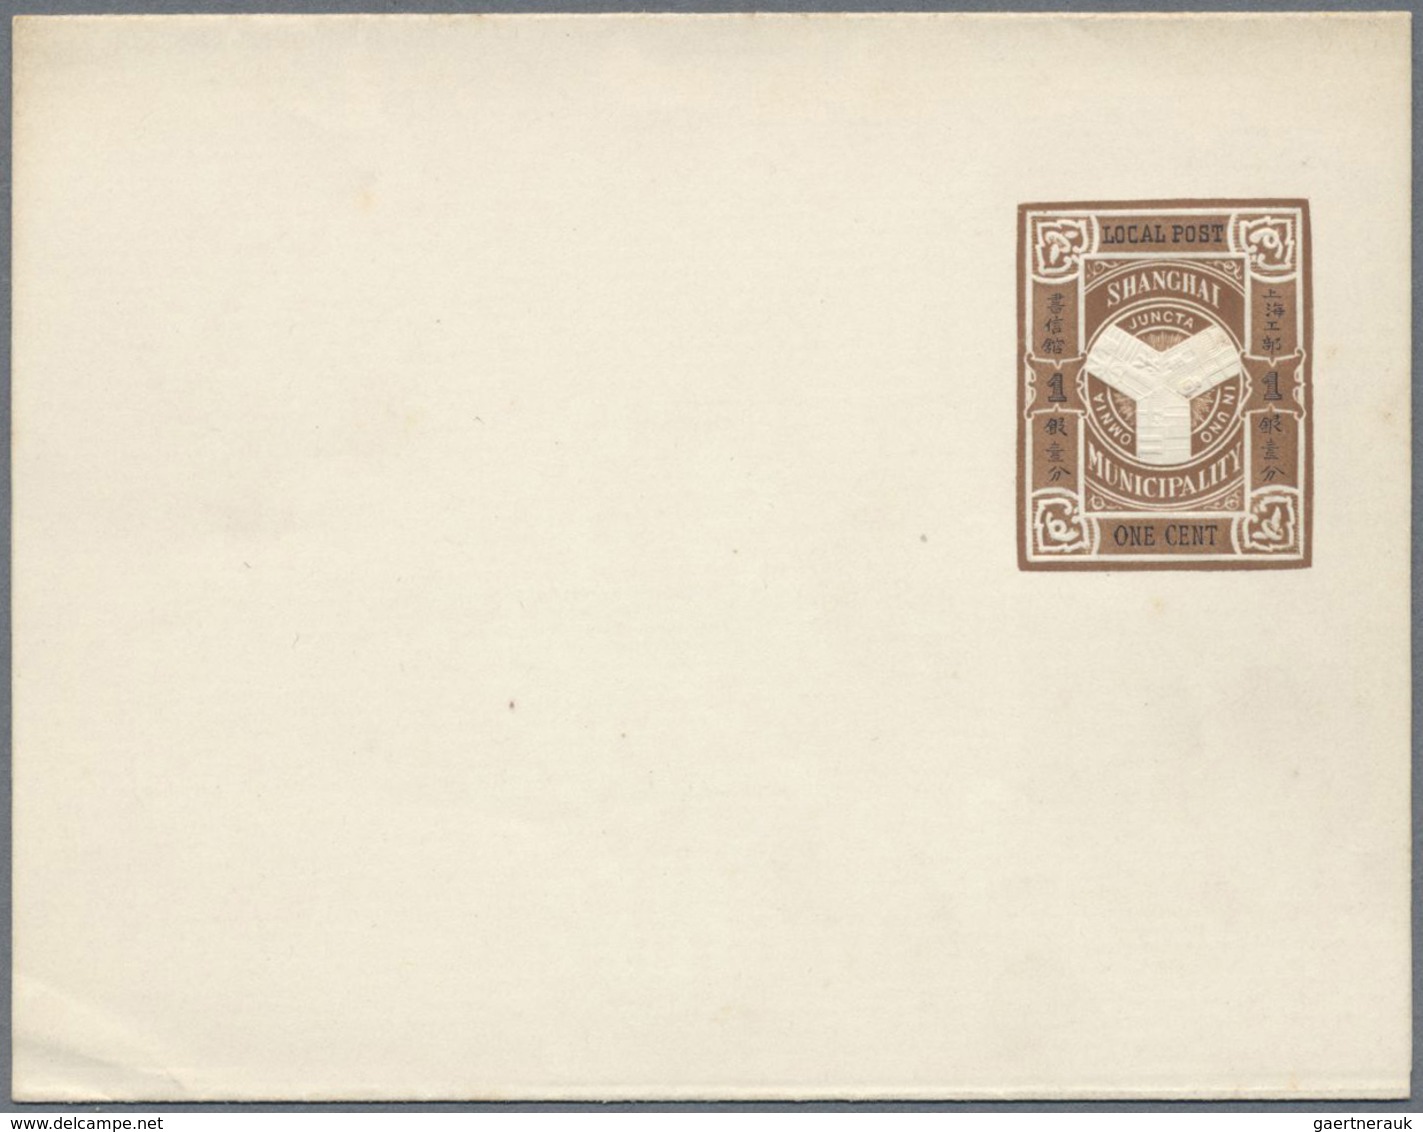 GA China - Ganzsachen: 1898/1908, lot mint stationery (,7 inc. 1912 1+1 C. ovpt. reply card) plus Shang